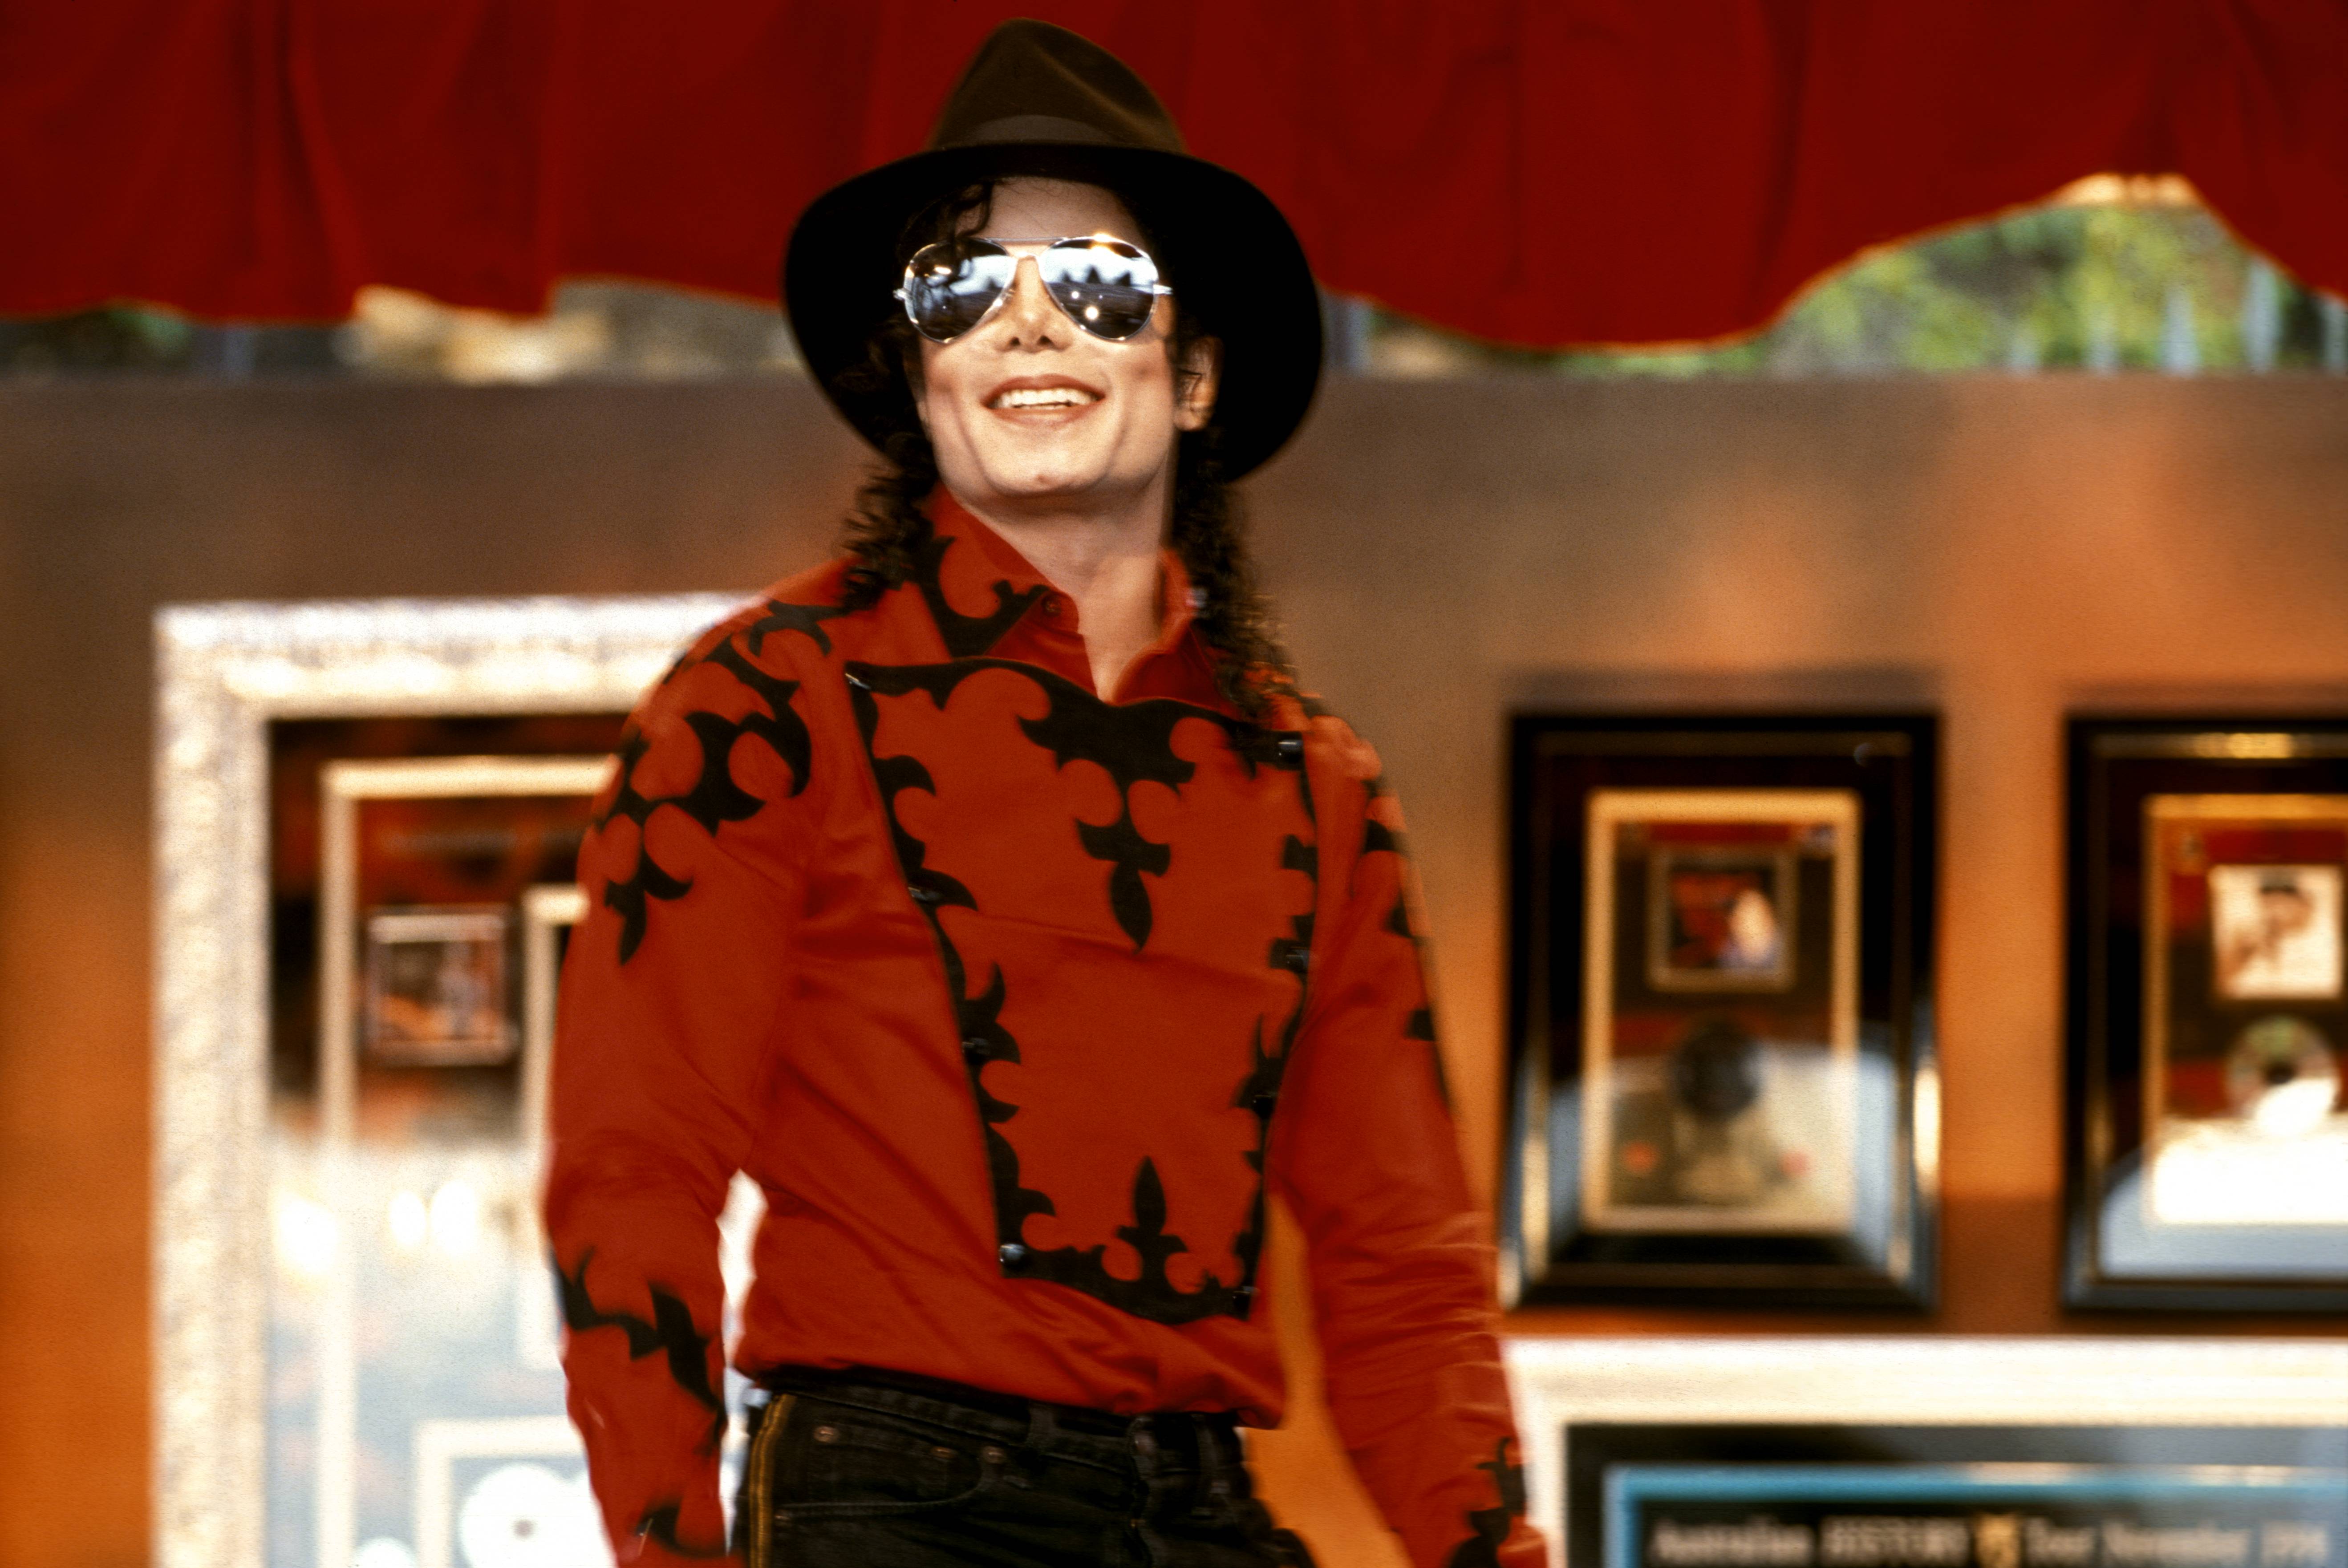 Portrait of Michael Jackson in 1996 wearing hat and sunglasses